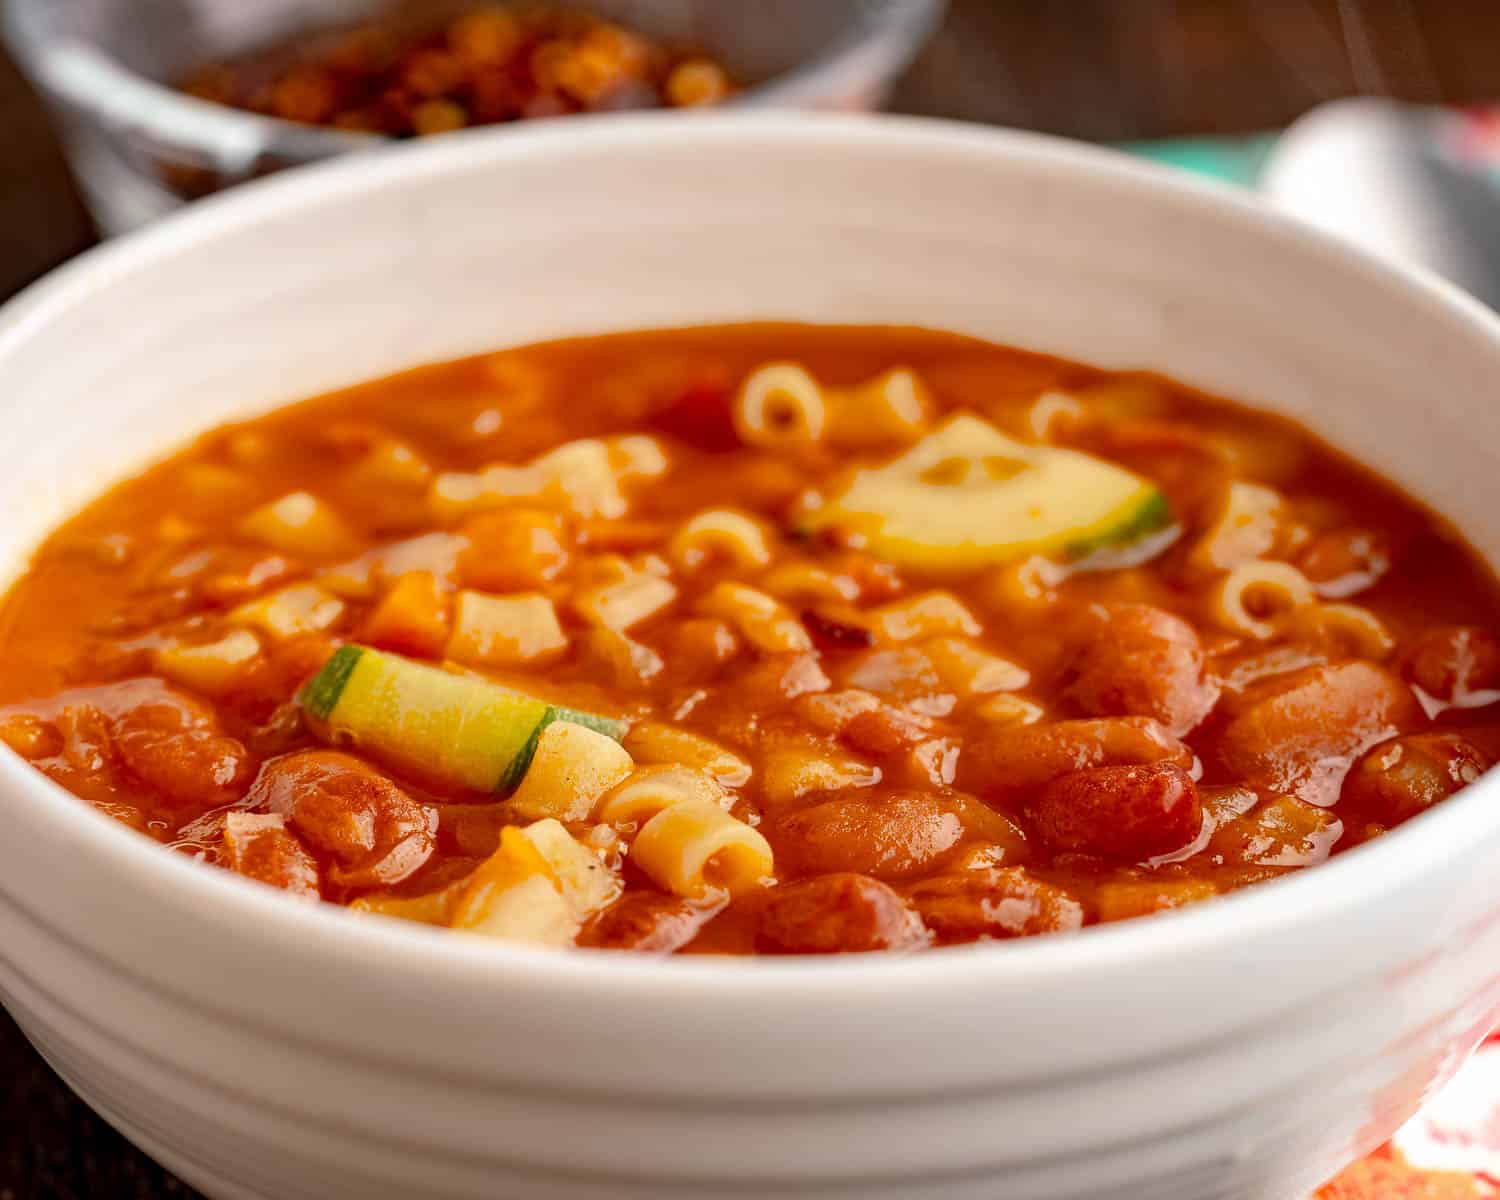 A bowl of minestrone with beans, pasta, and zucchini